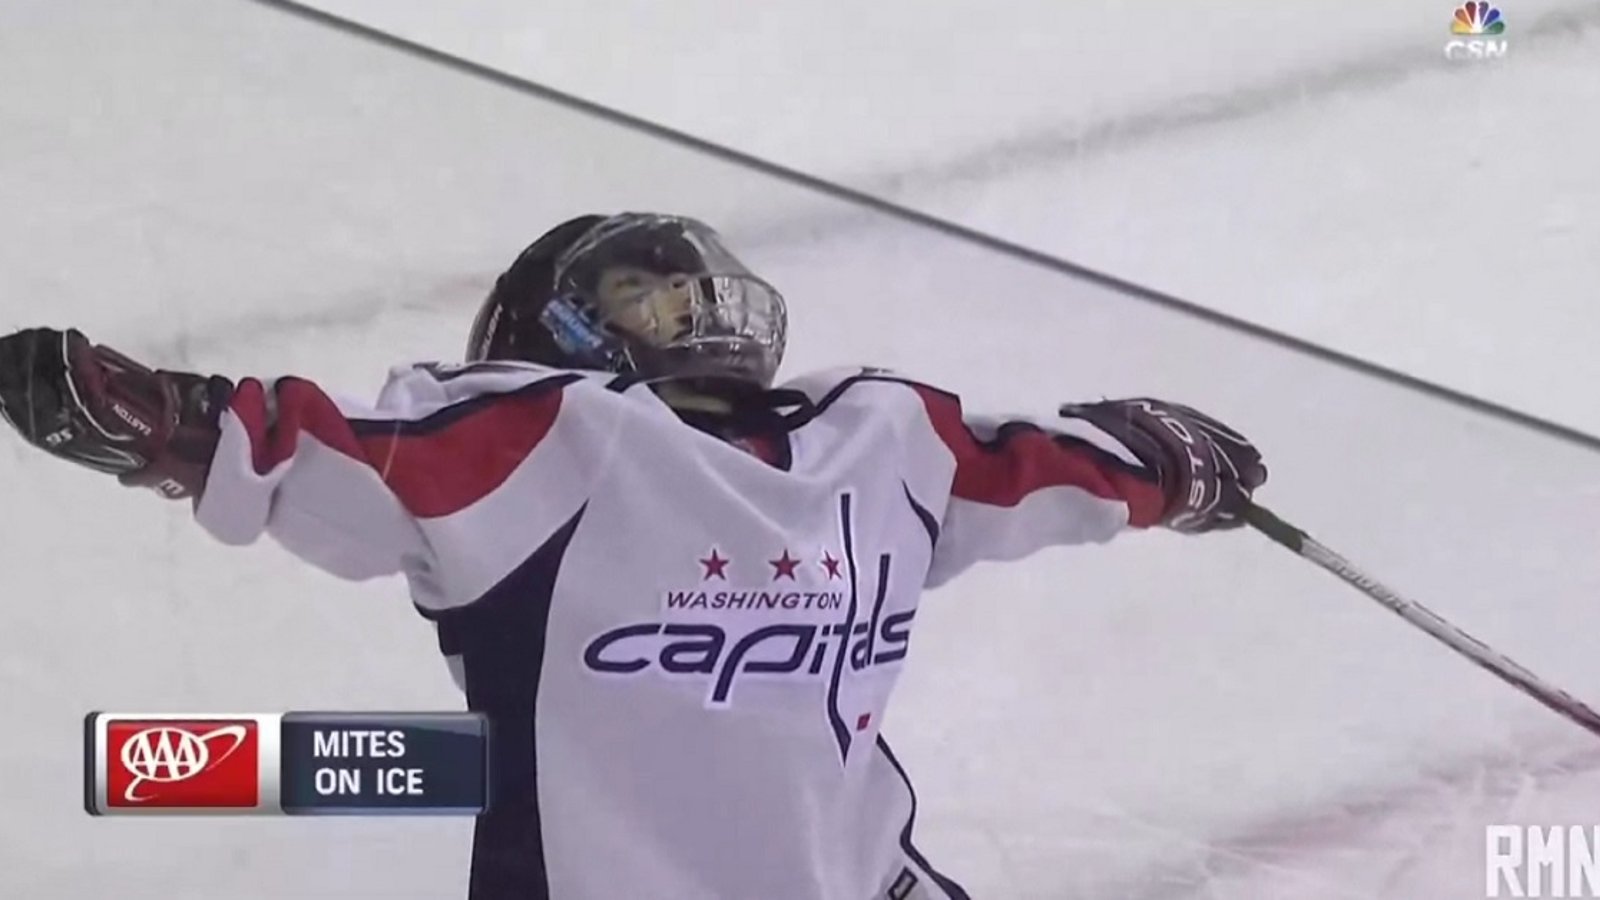 Little Mite player scores during intermission and has the best celebration ever!